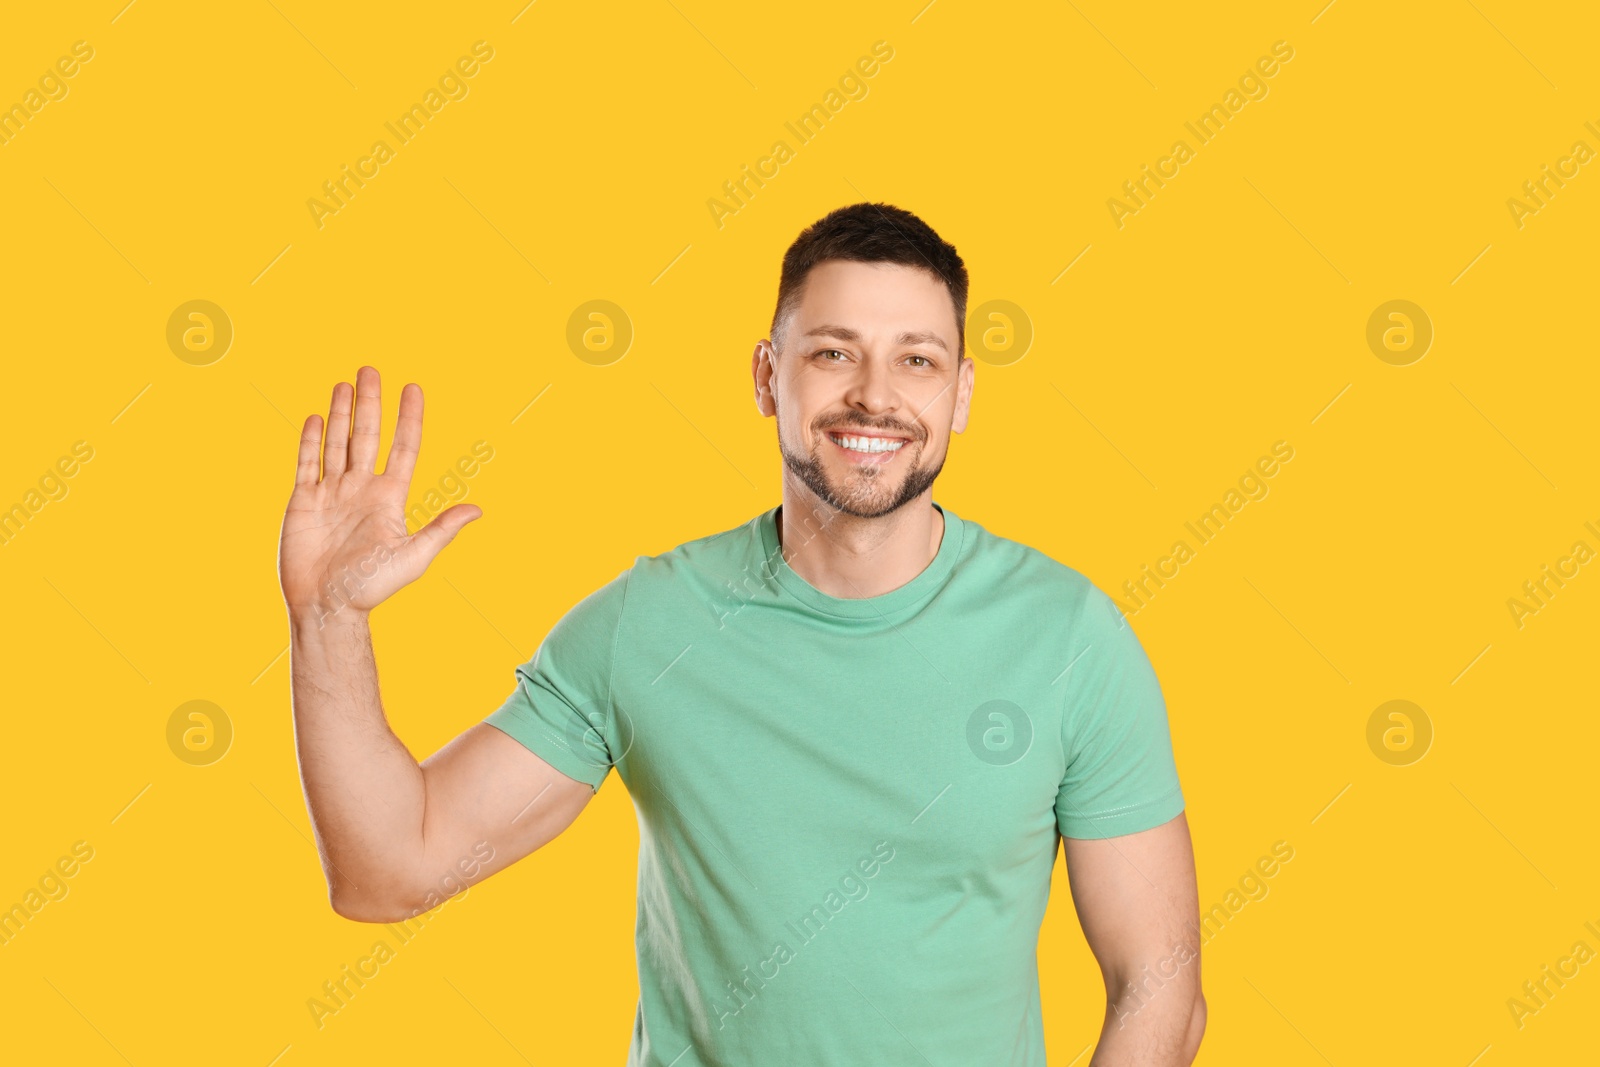 Photo of Cheerful man waving to say hello on yellow background